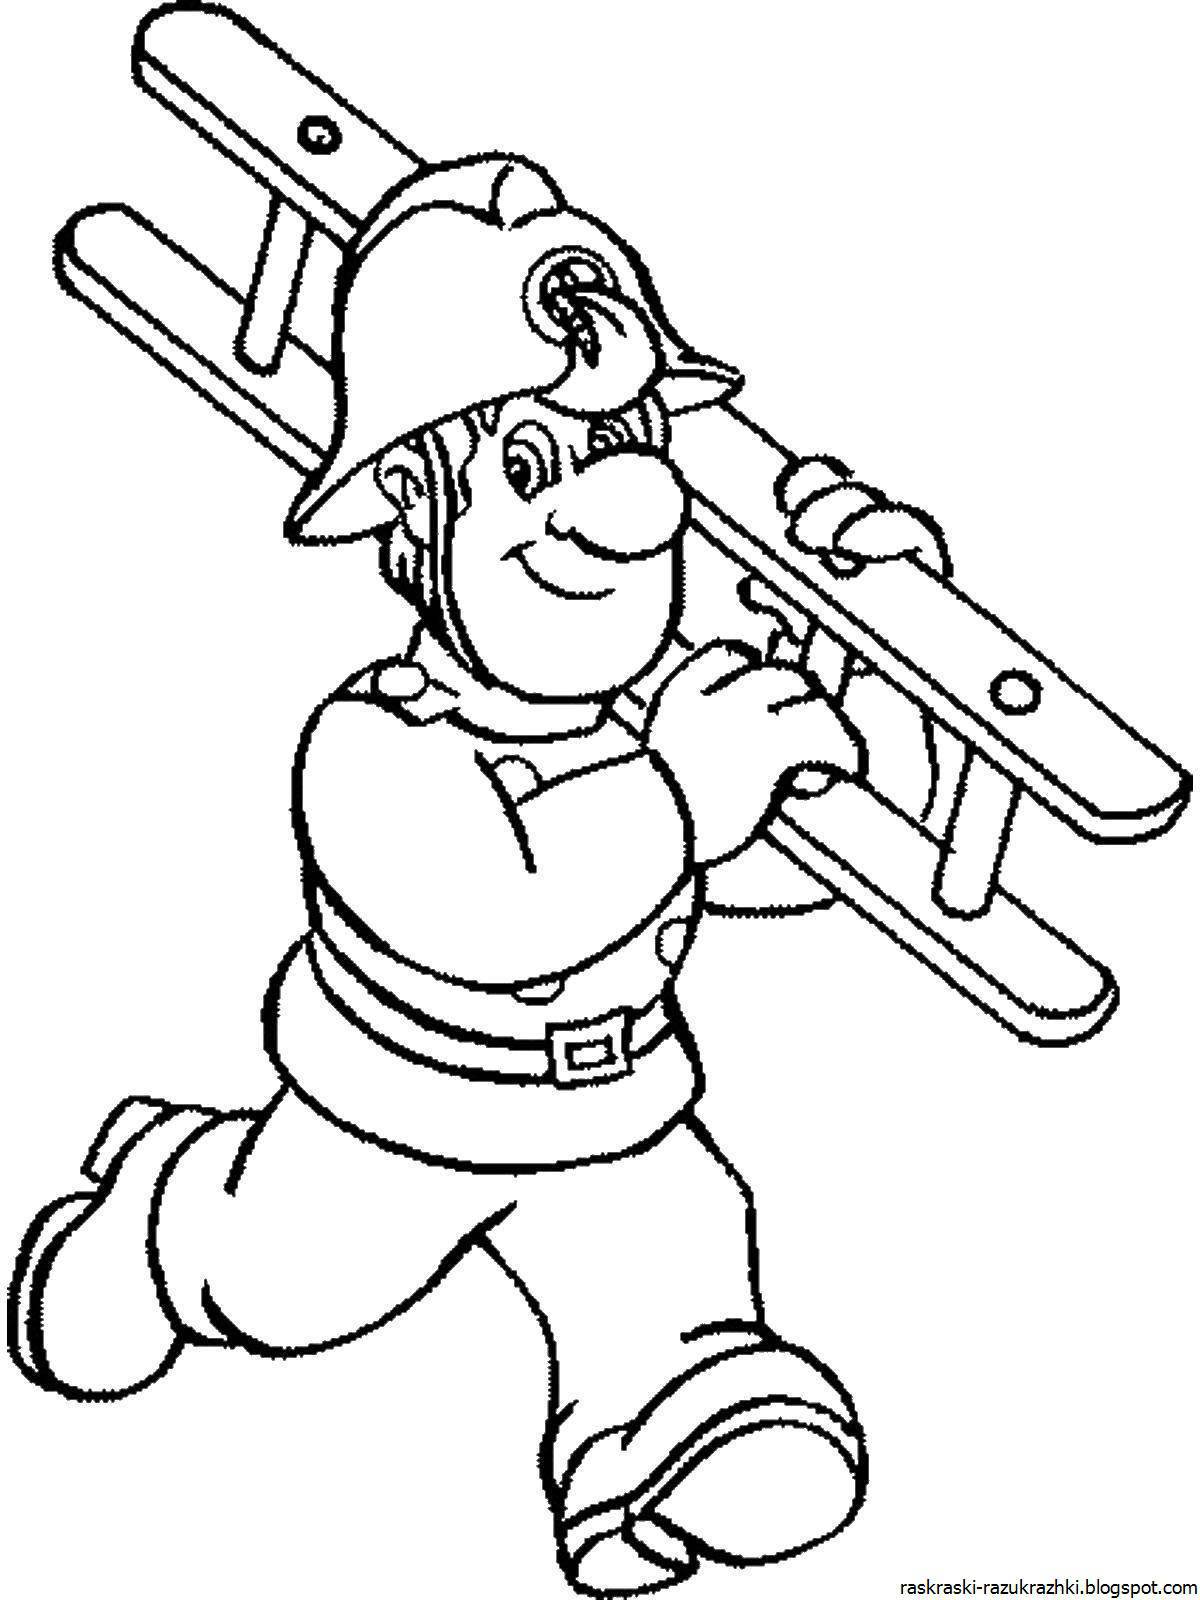 Coloring fireman for kids